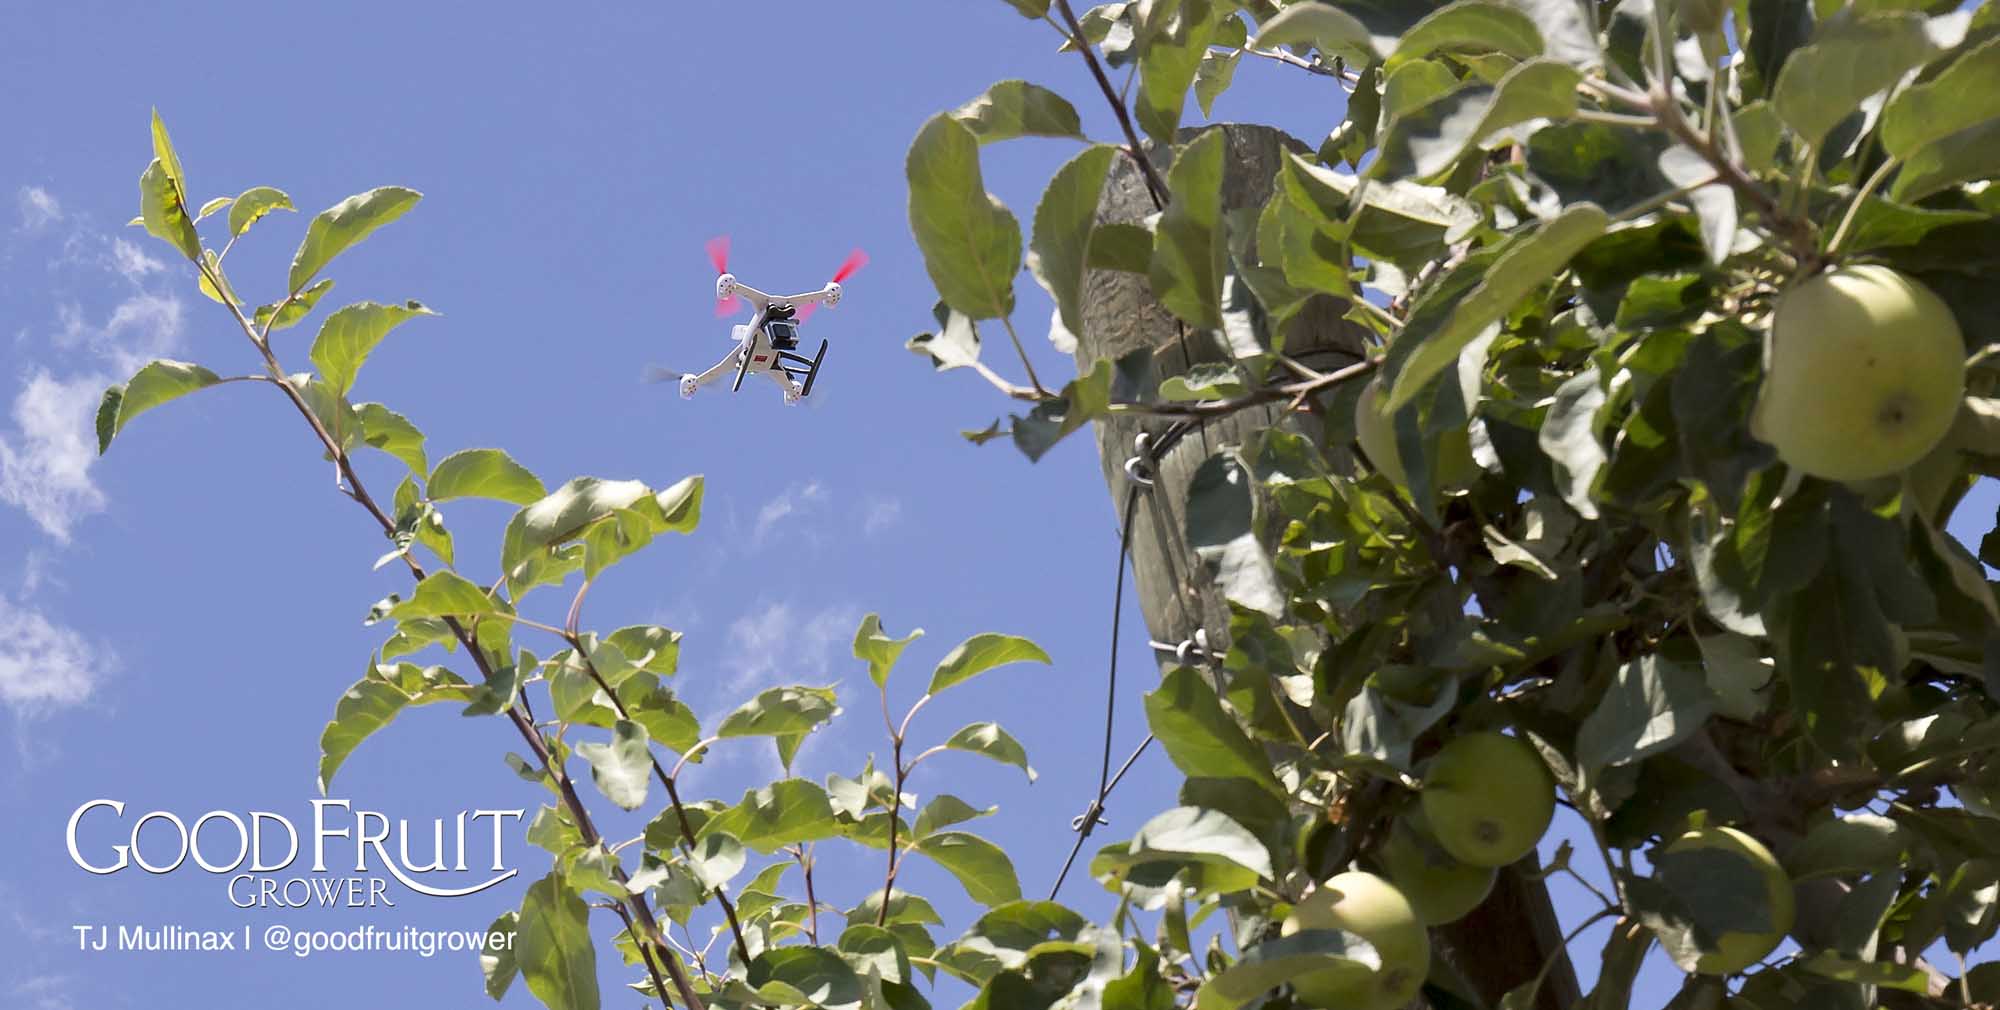 Quadcopter use during the equipment demonstration on third day of the IFTA Washington tour on July 17, 2015.<b> (TJ Mullinax/Good Fruit Grower)</b>